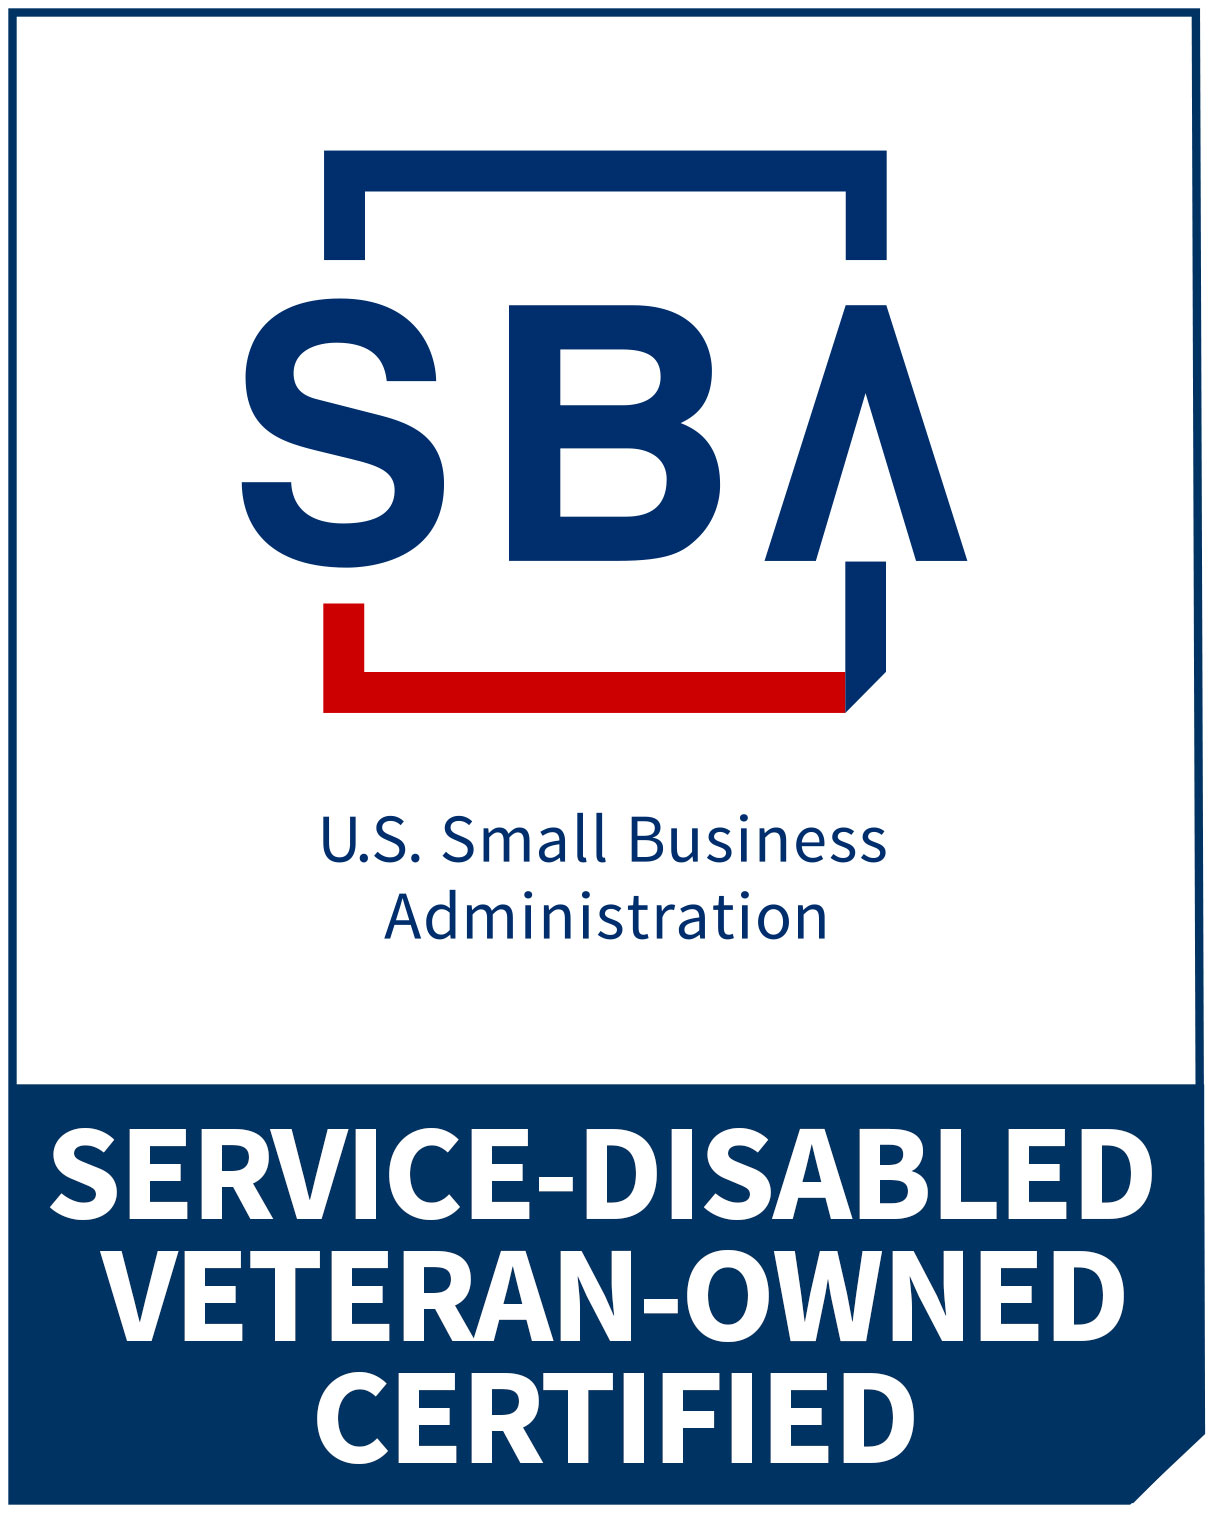 U.S. Small Business Administration service-disabled veteran-owned certified logo